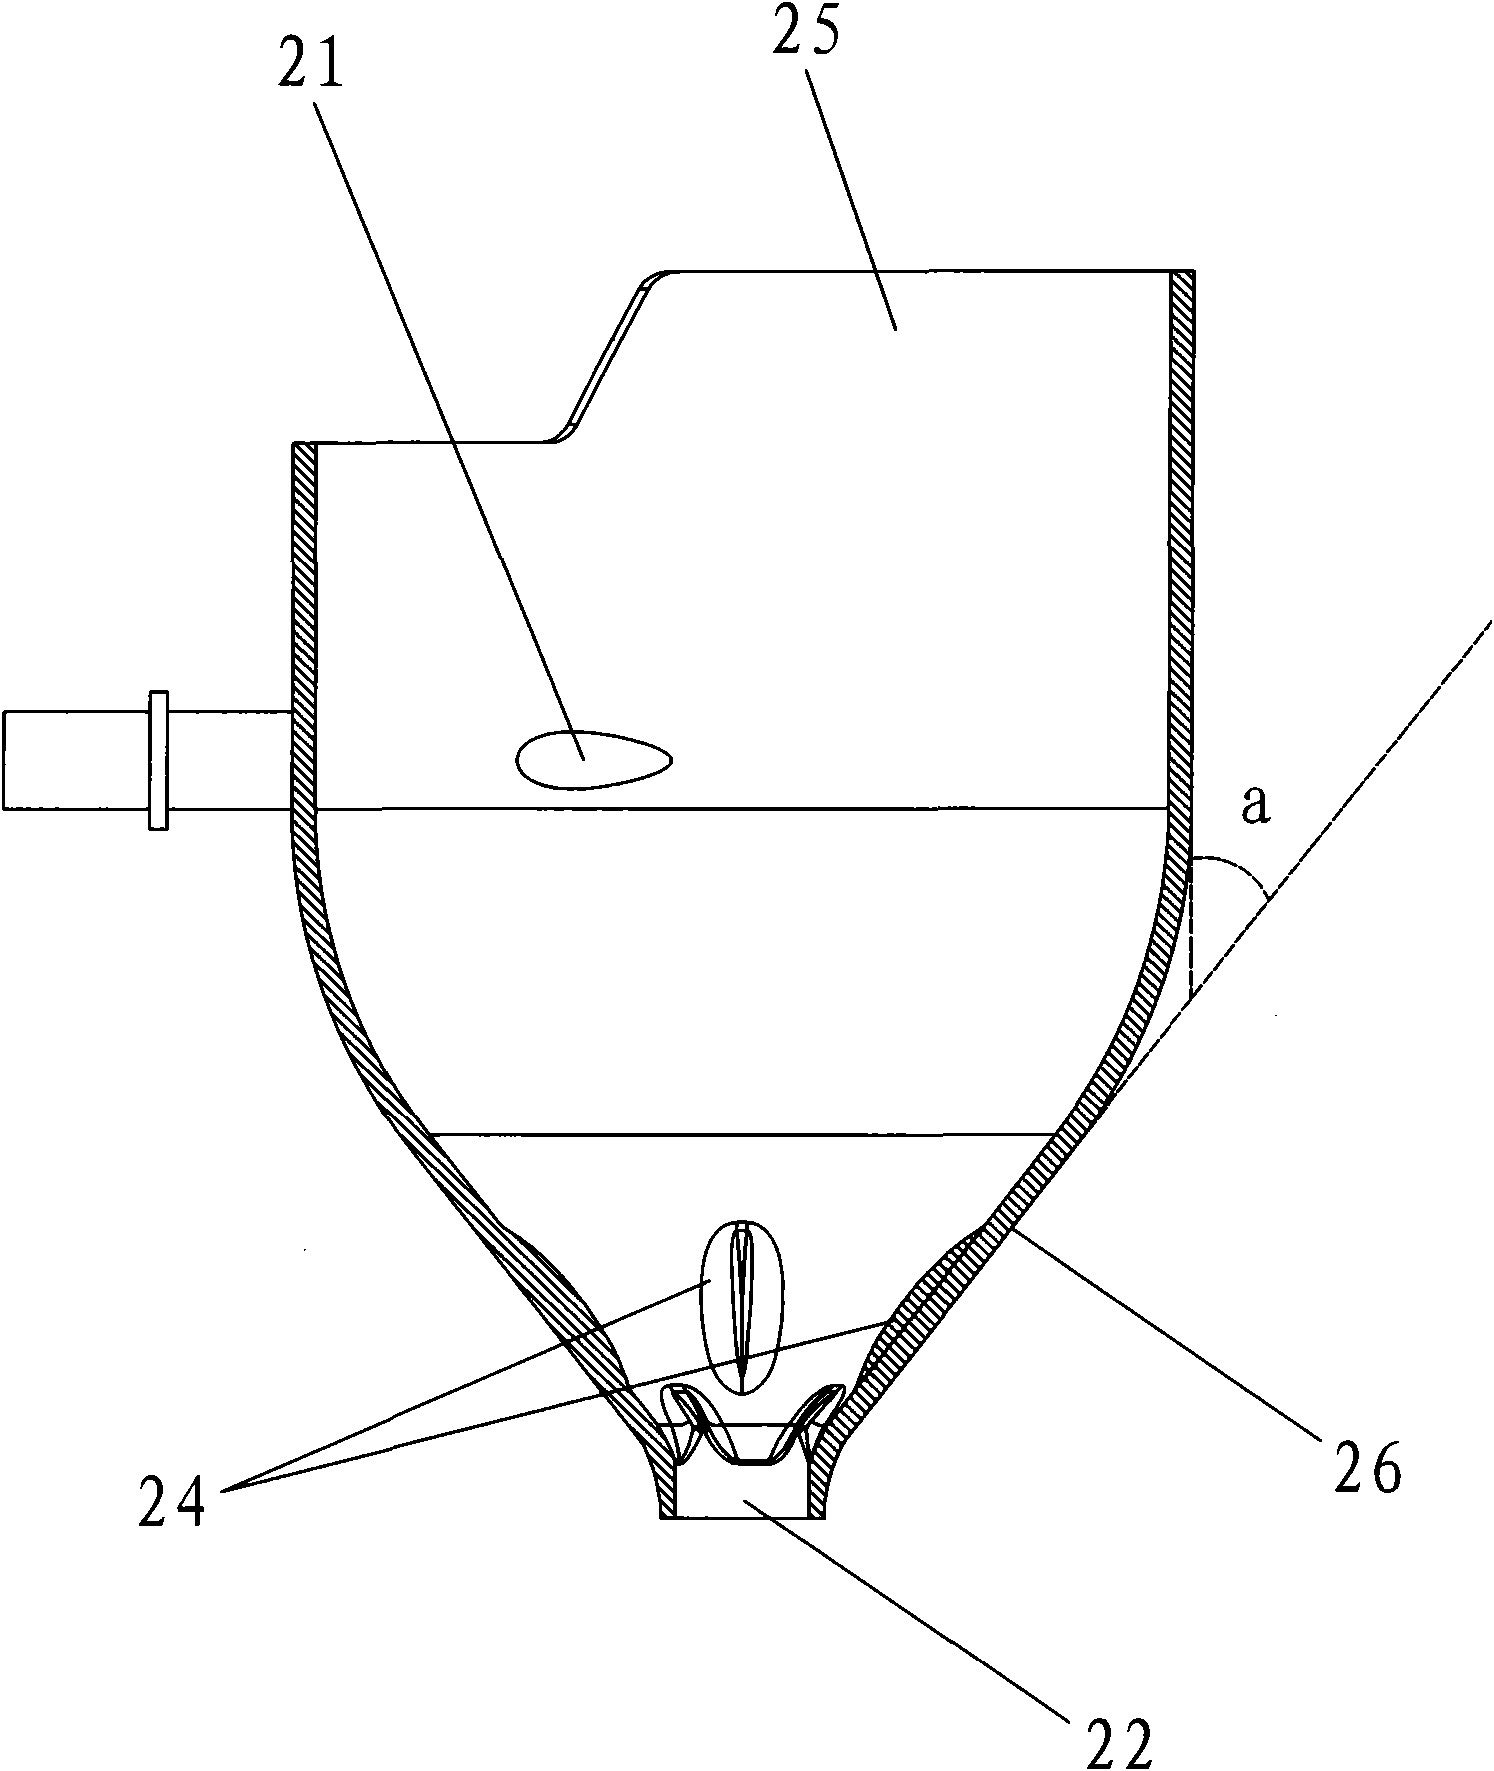 Method for quickly dissolving powdered milk